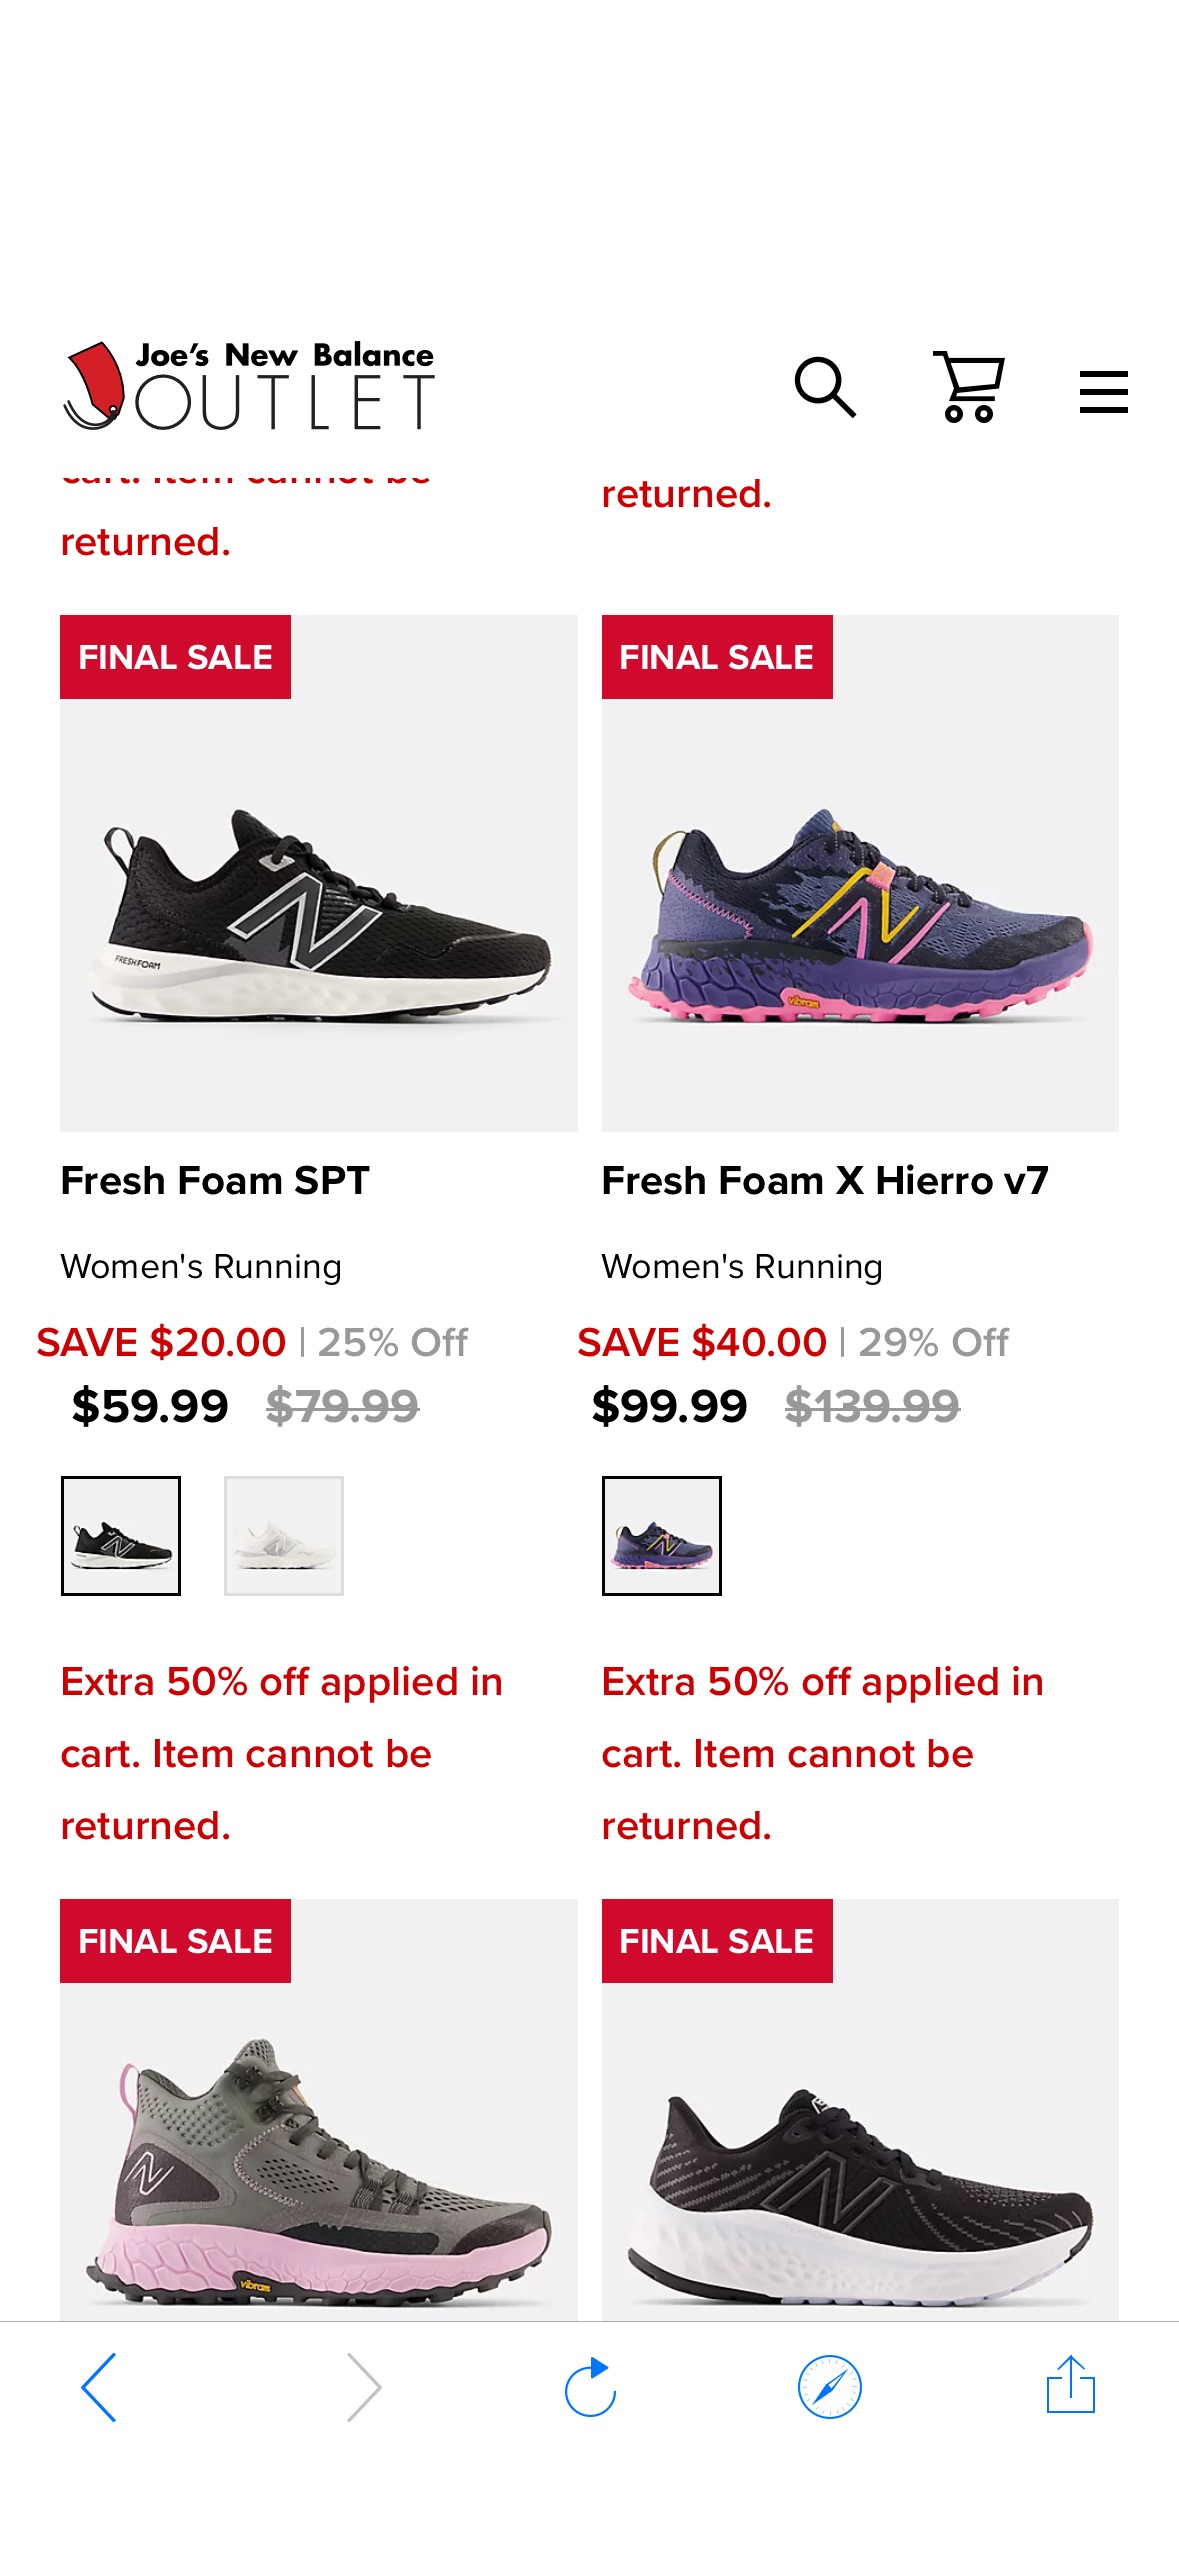 New Balance Shoes, Clothing & Accessories on Sale - Joe's New Balance Outlet